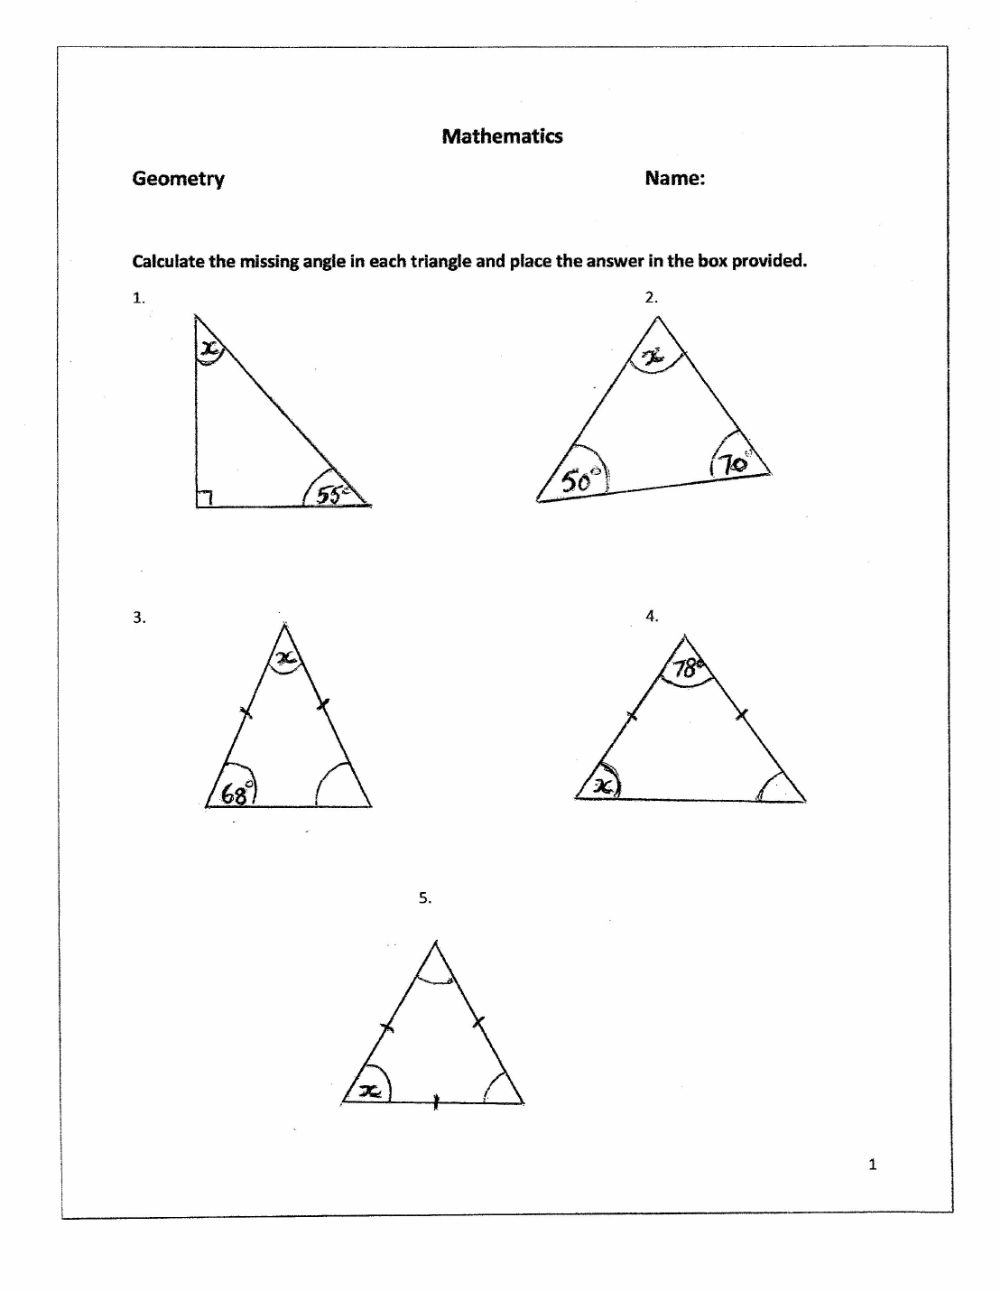 Solving For Missing Angles In A Triangle Worksheet 2066